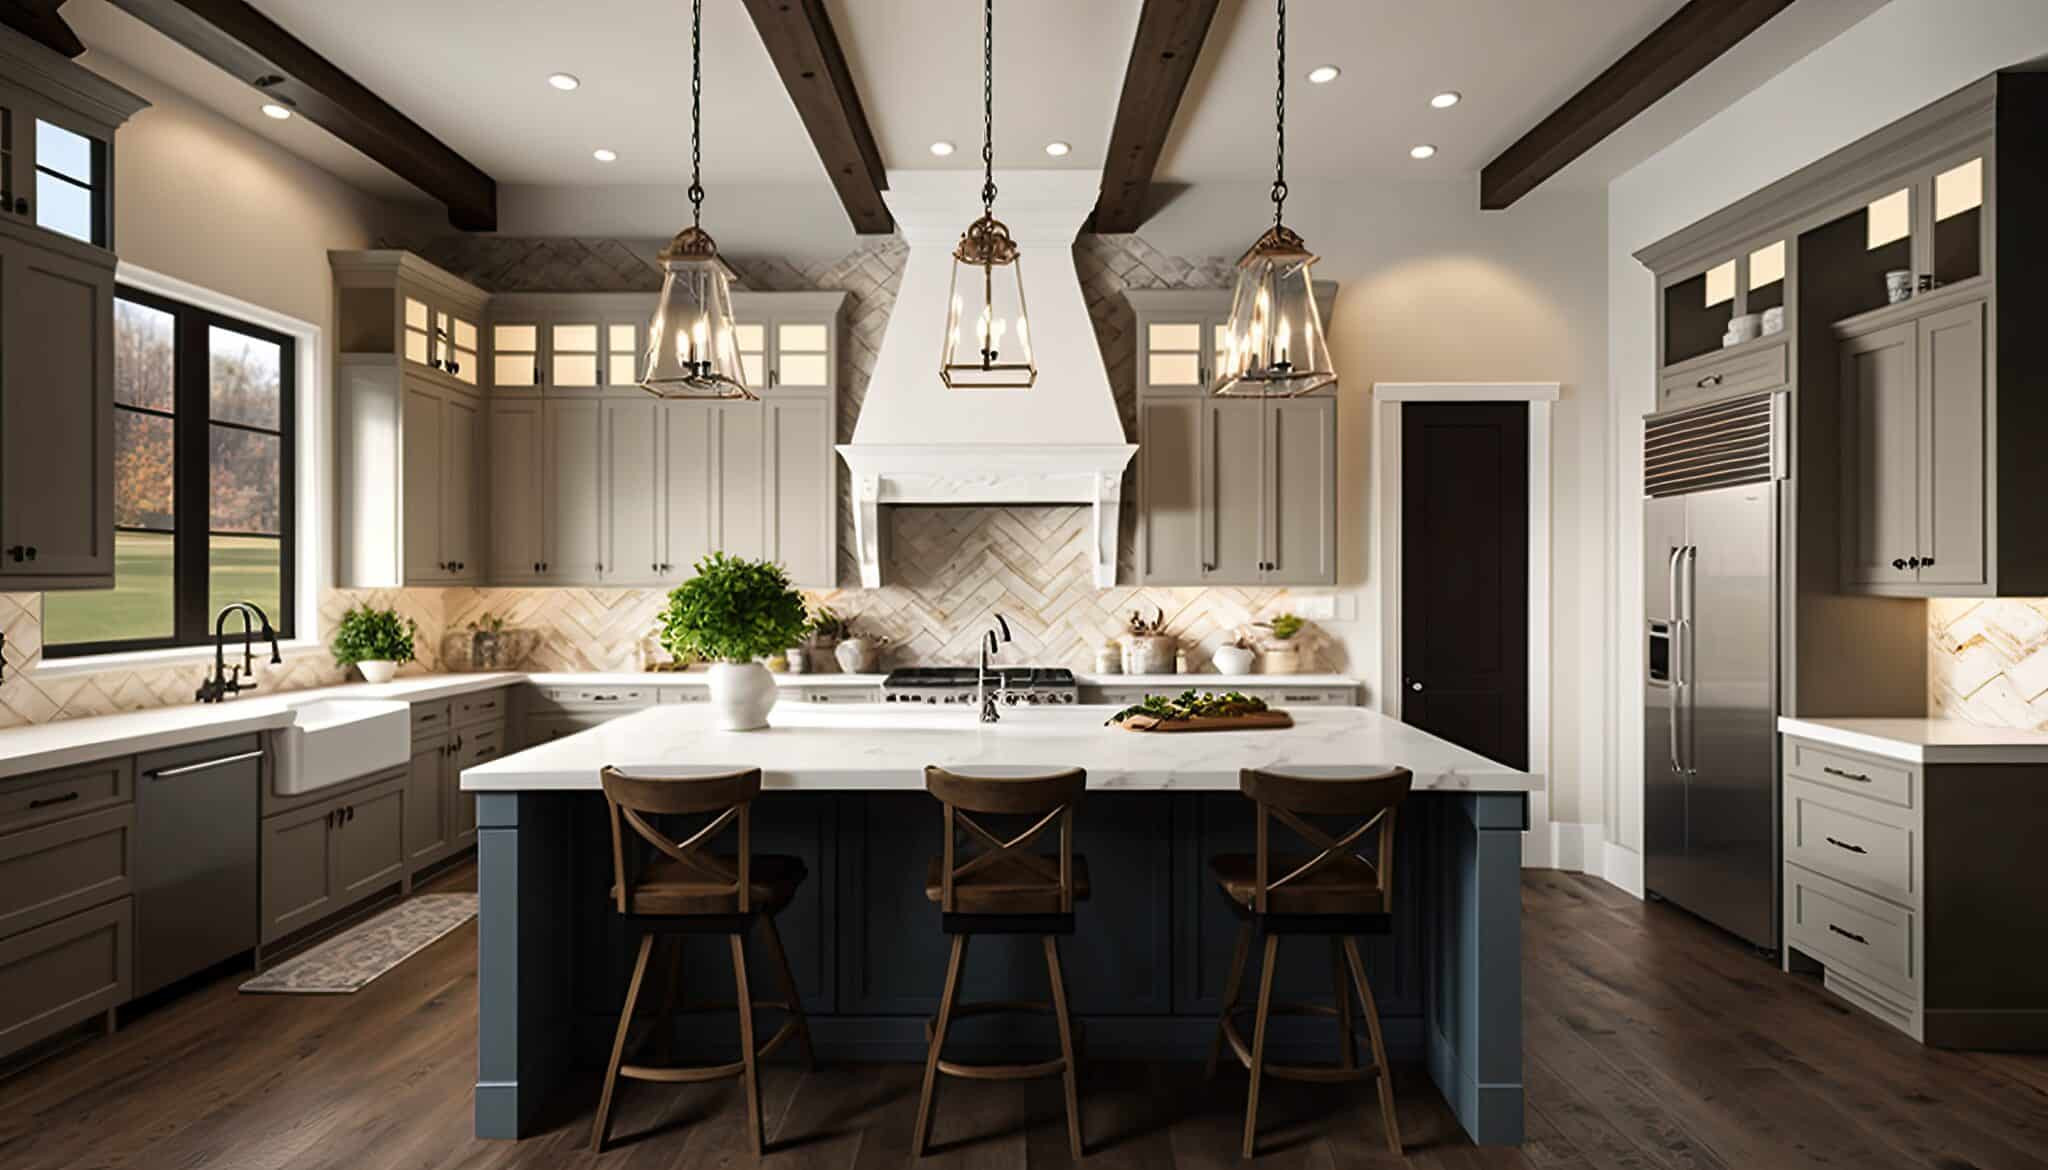 A luxury kitchen remodel in a new home